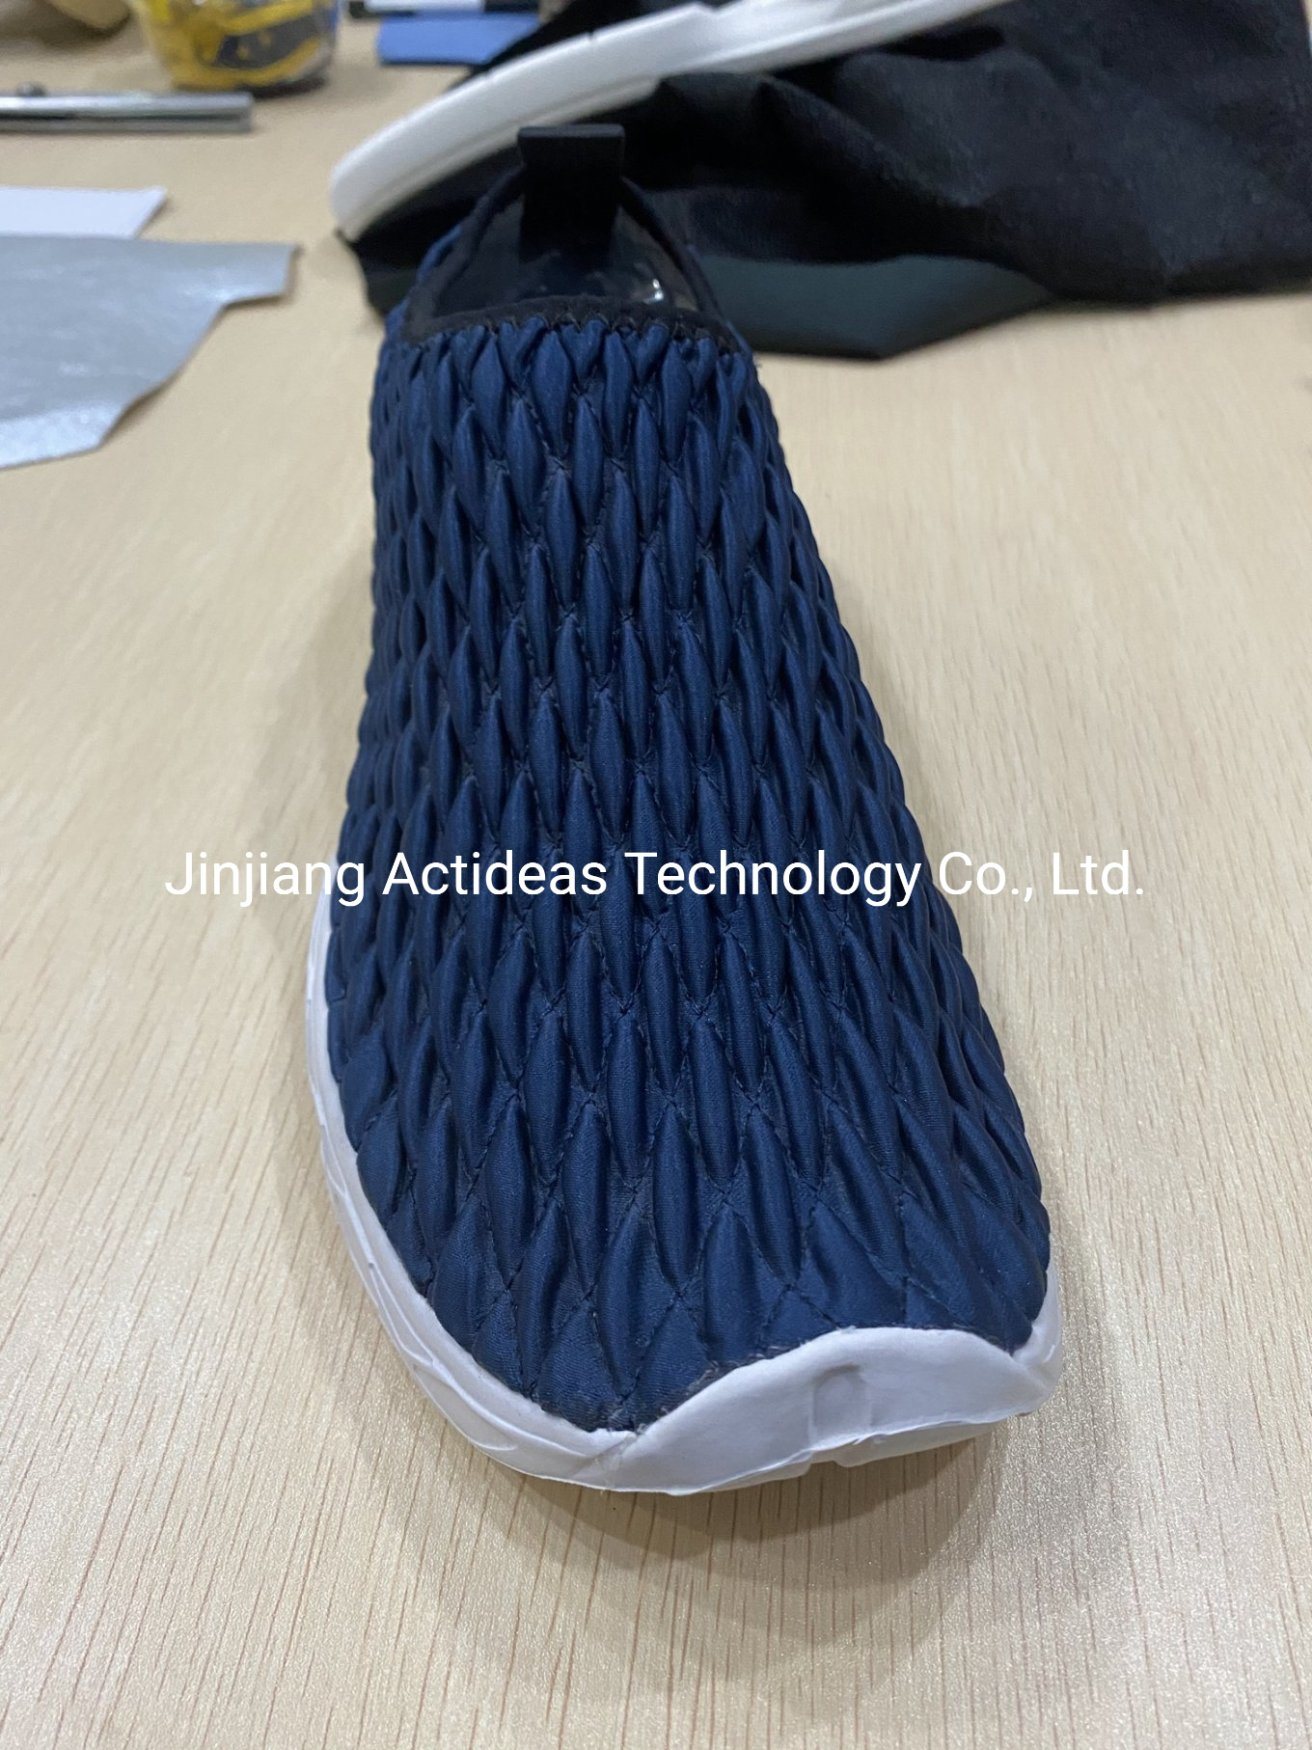 China Factory Supply Water Shoes Beach Shoes Barefoot Shoes